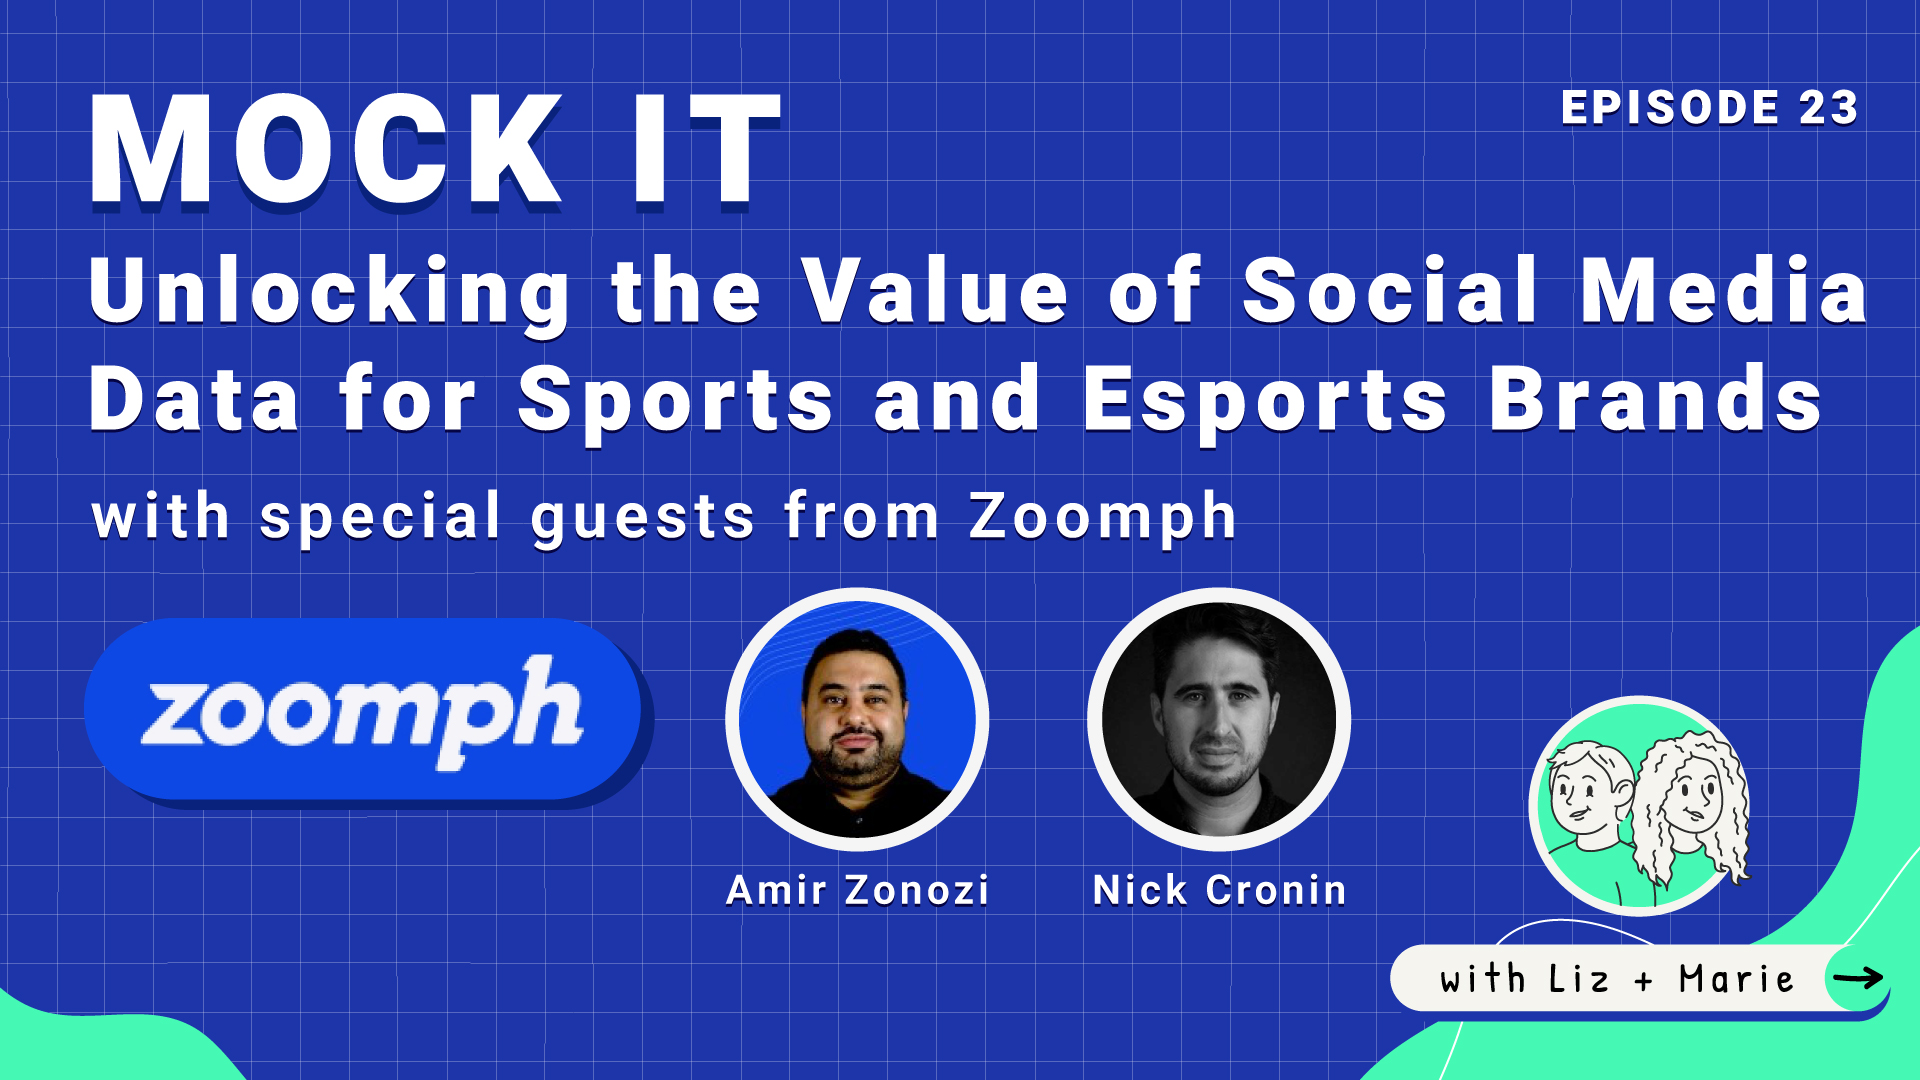 Text Reads: Unlocking the value of Social Media for Sports and Esports Brands with Zoomph